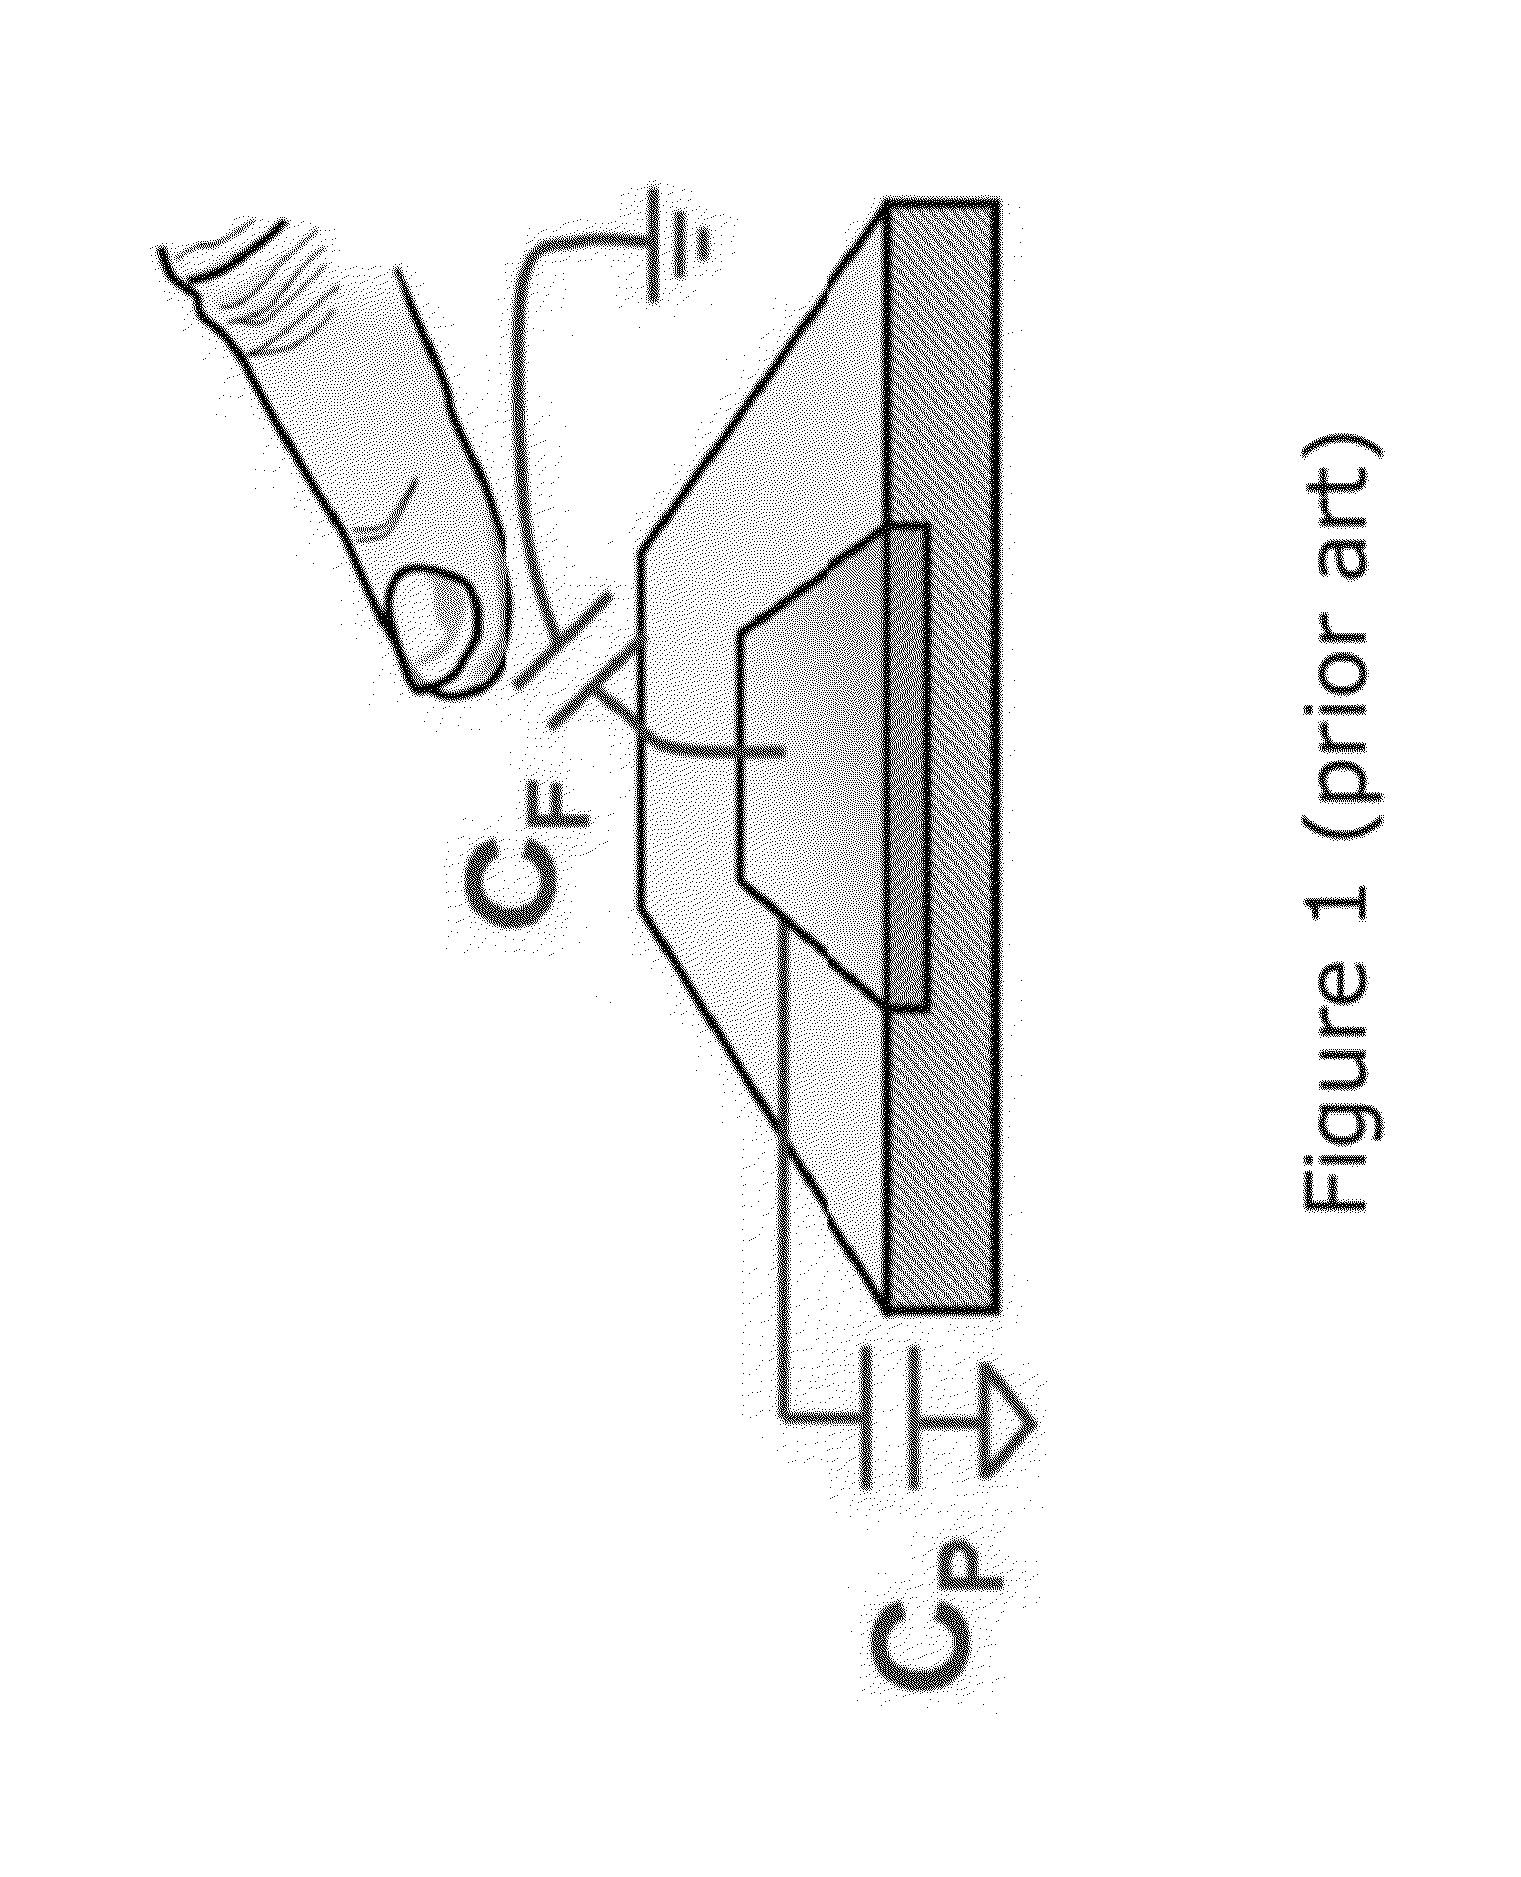 Capacitive sensor with active shield electrode